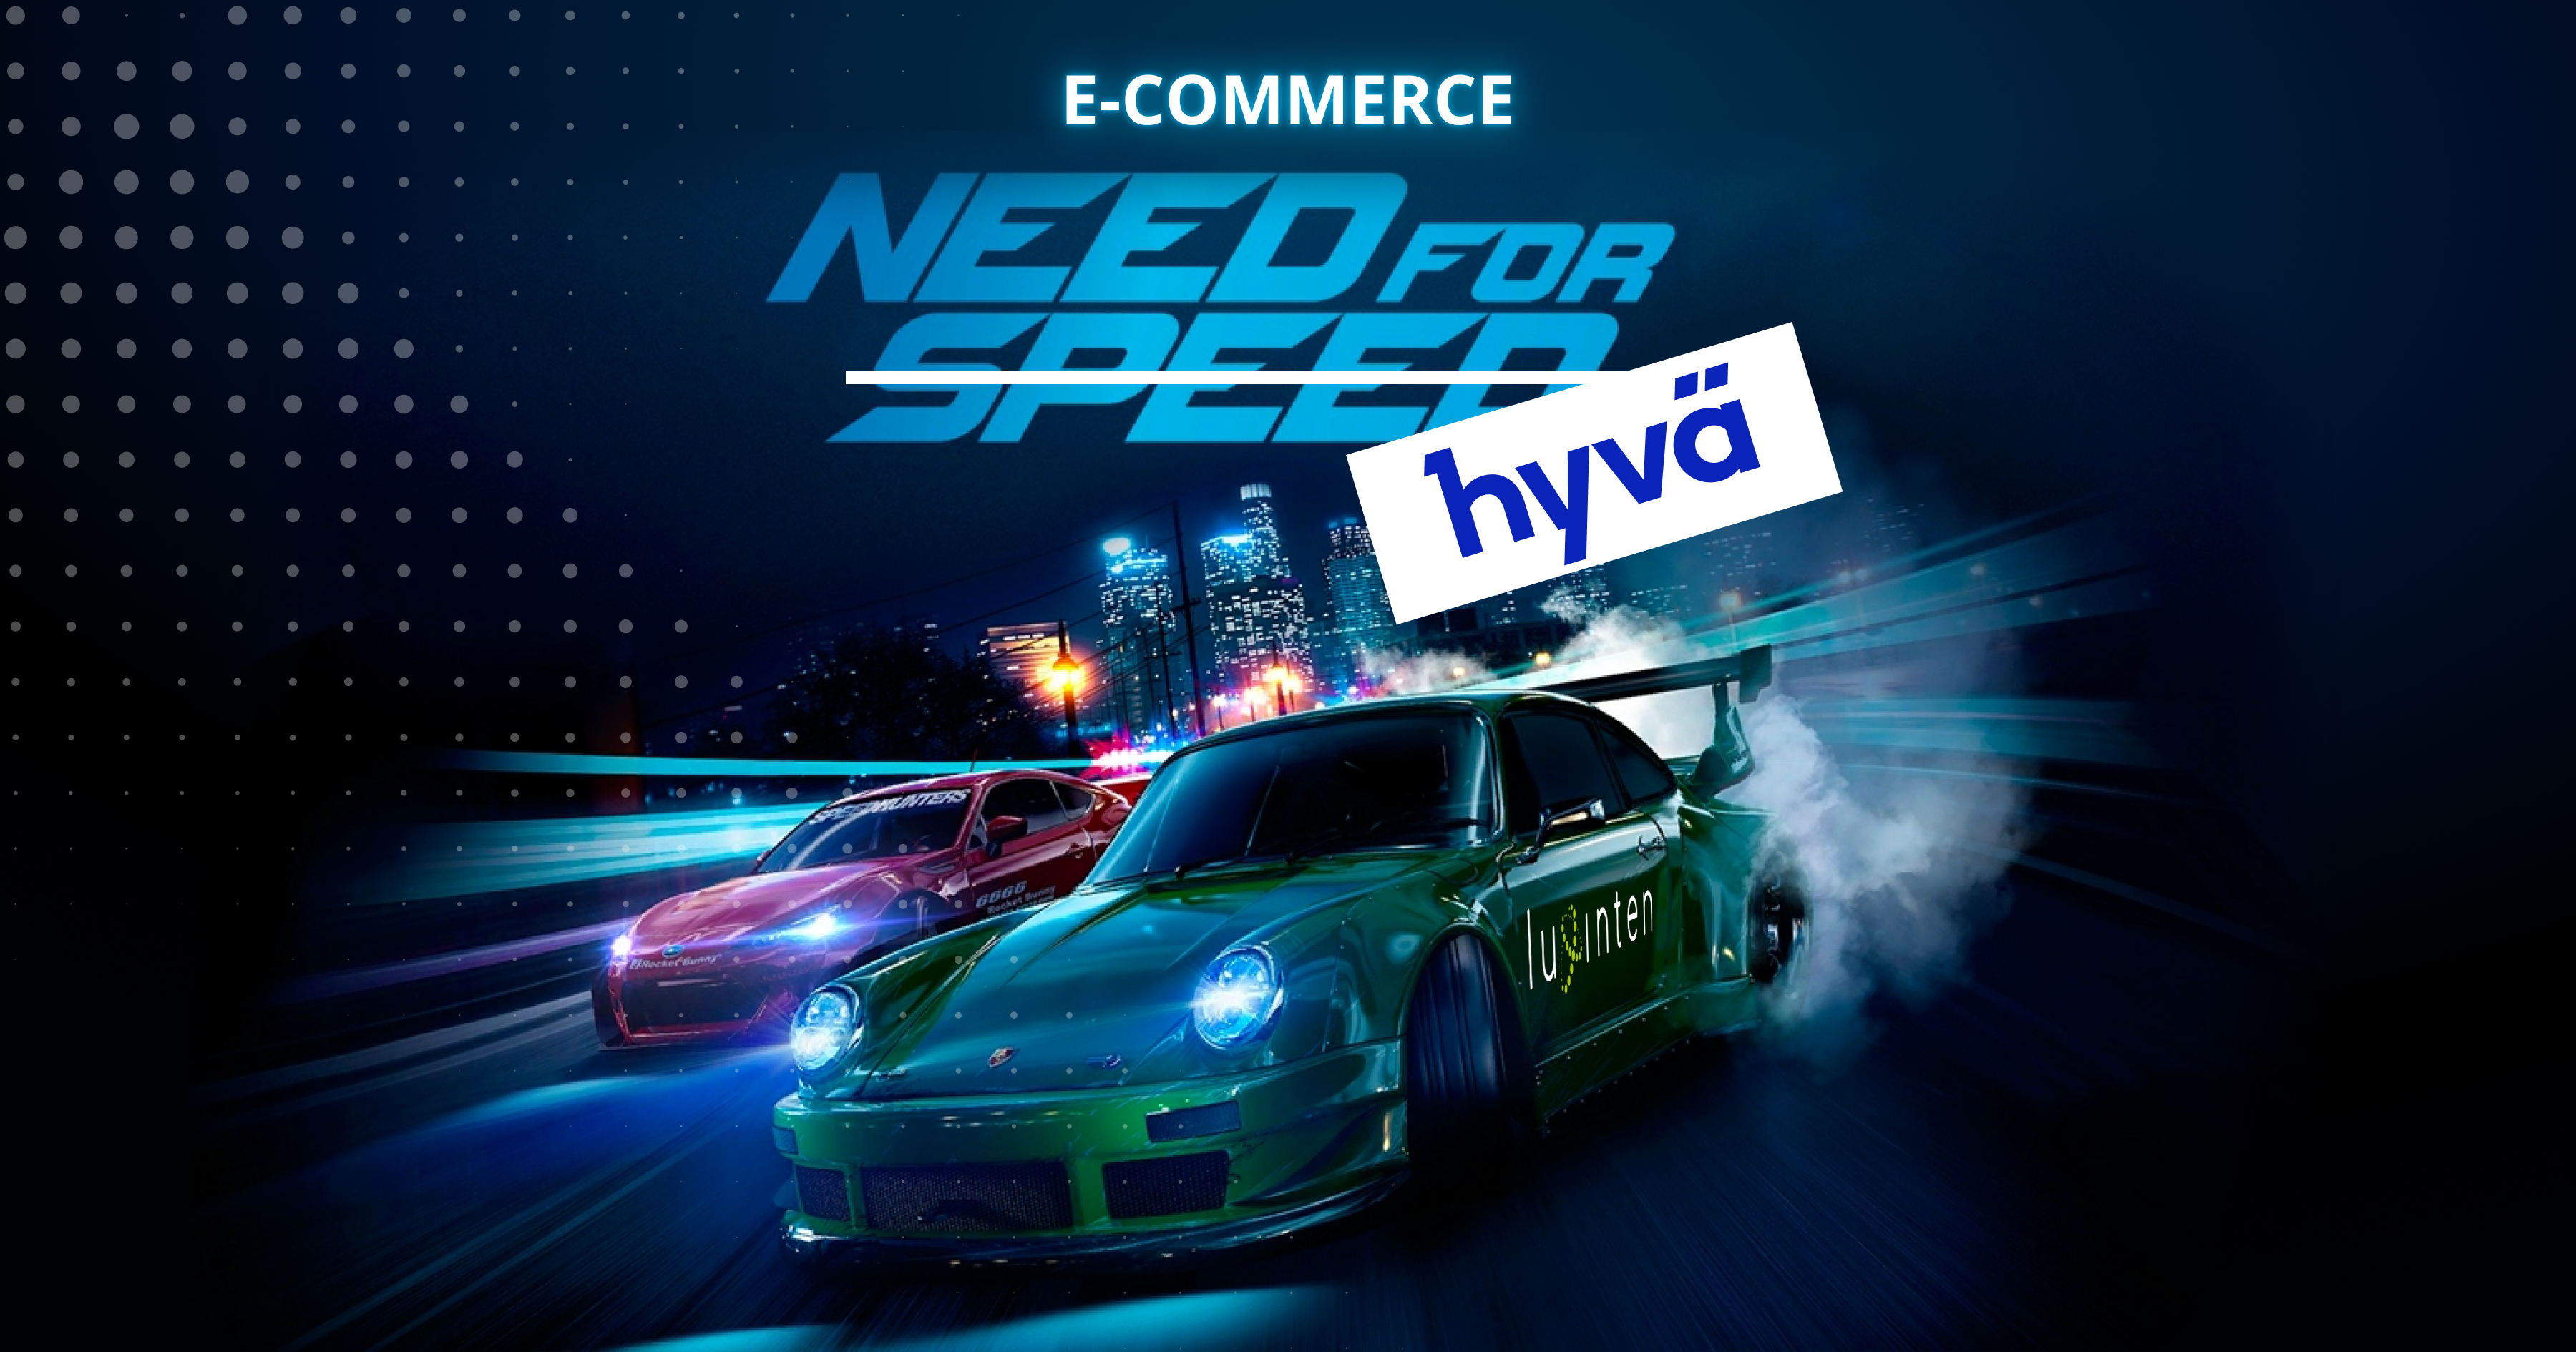 The Need for Speed with Hyvä Theme 